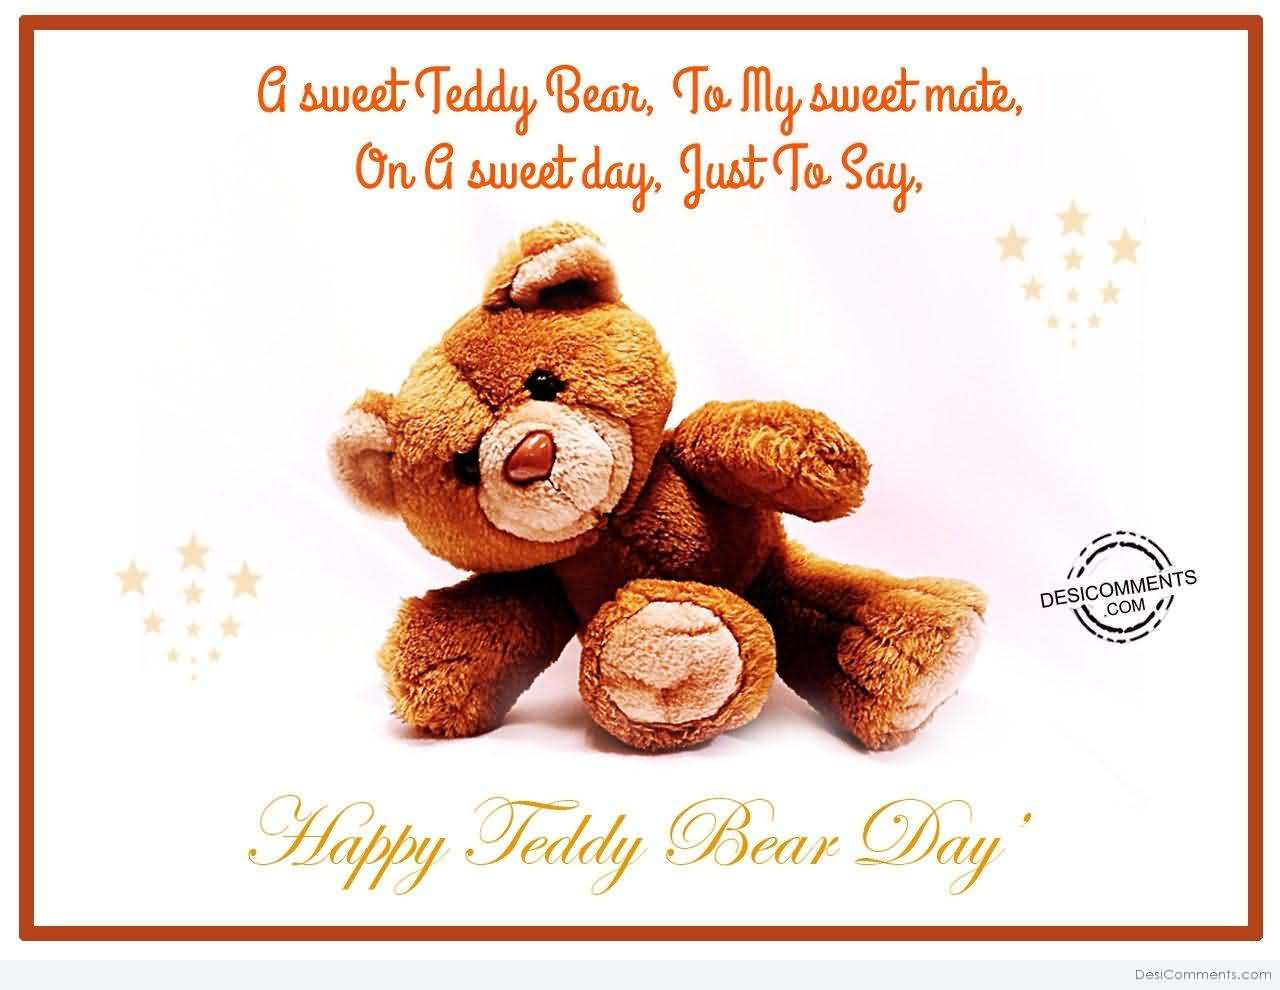 a sweet teddy bear, to my sweet mate, on a sweet day, just to say happy teddy bear day